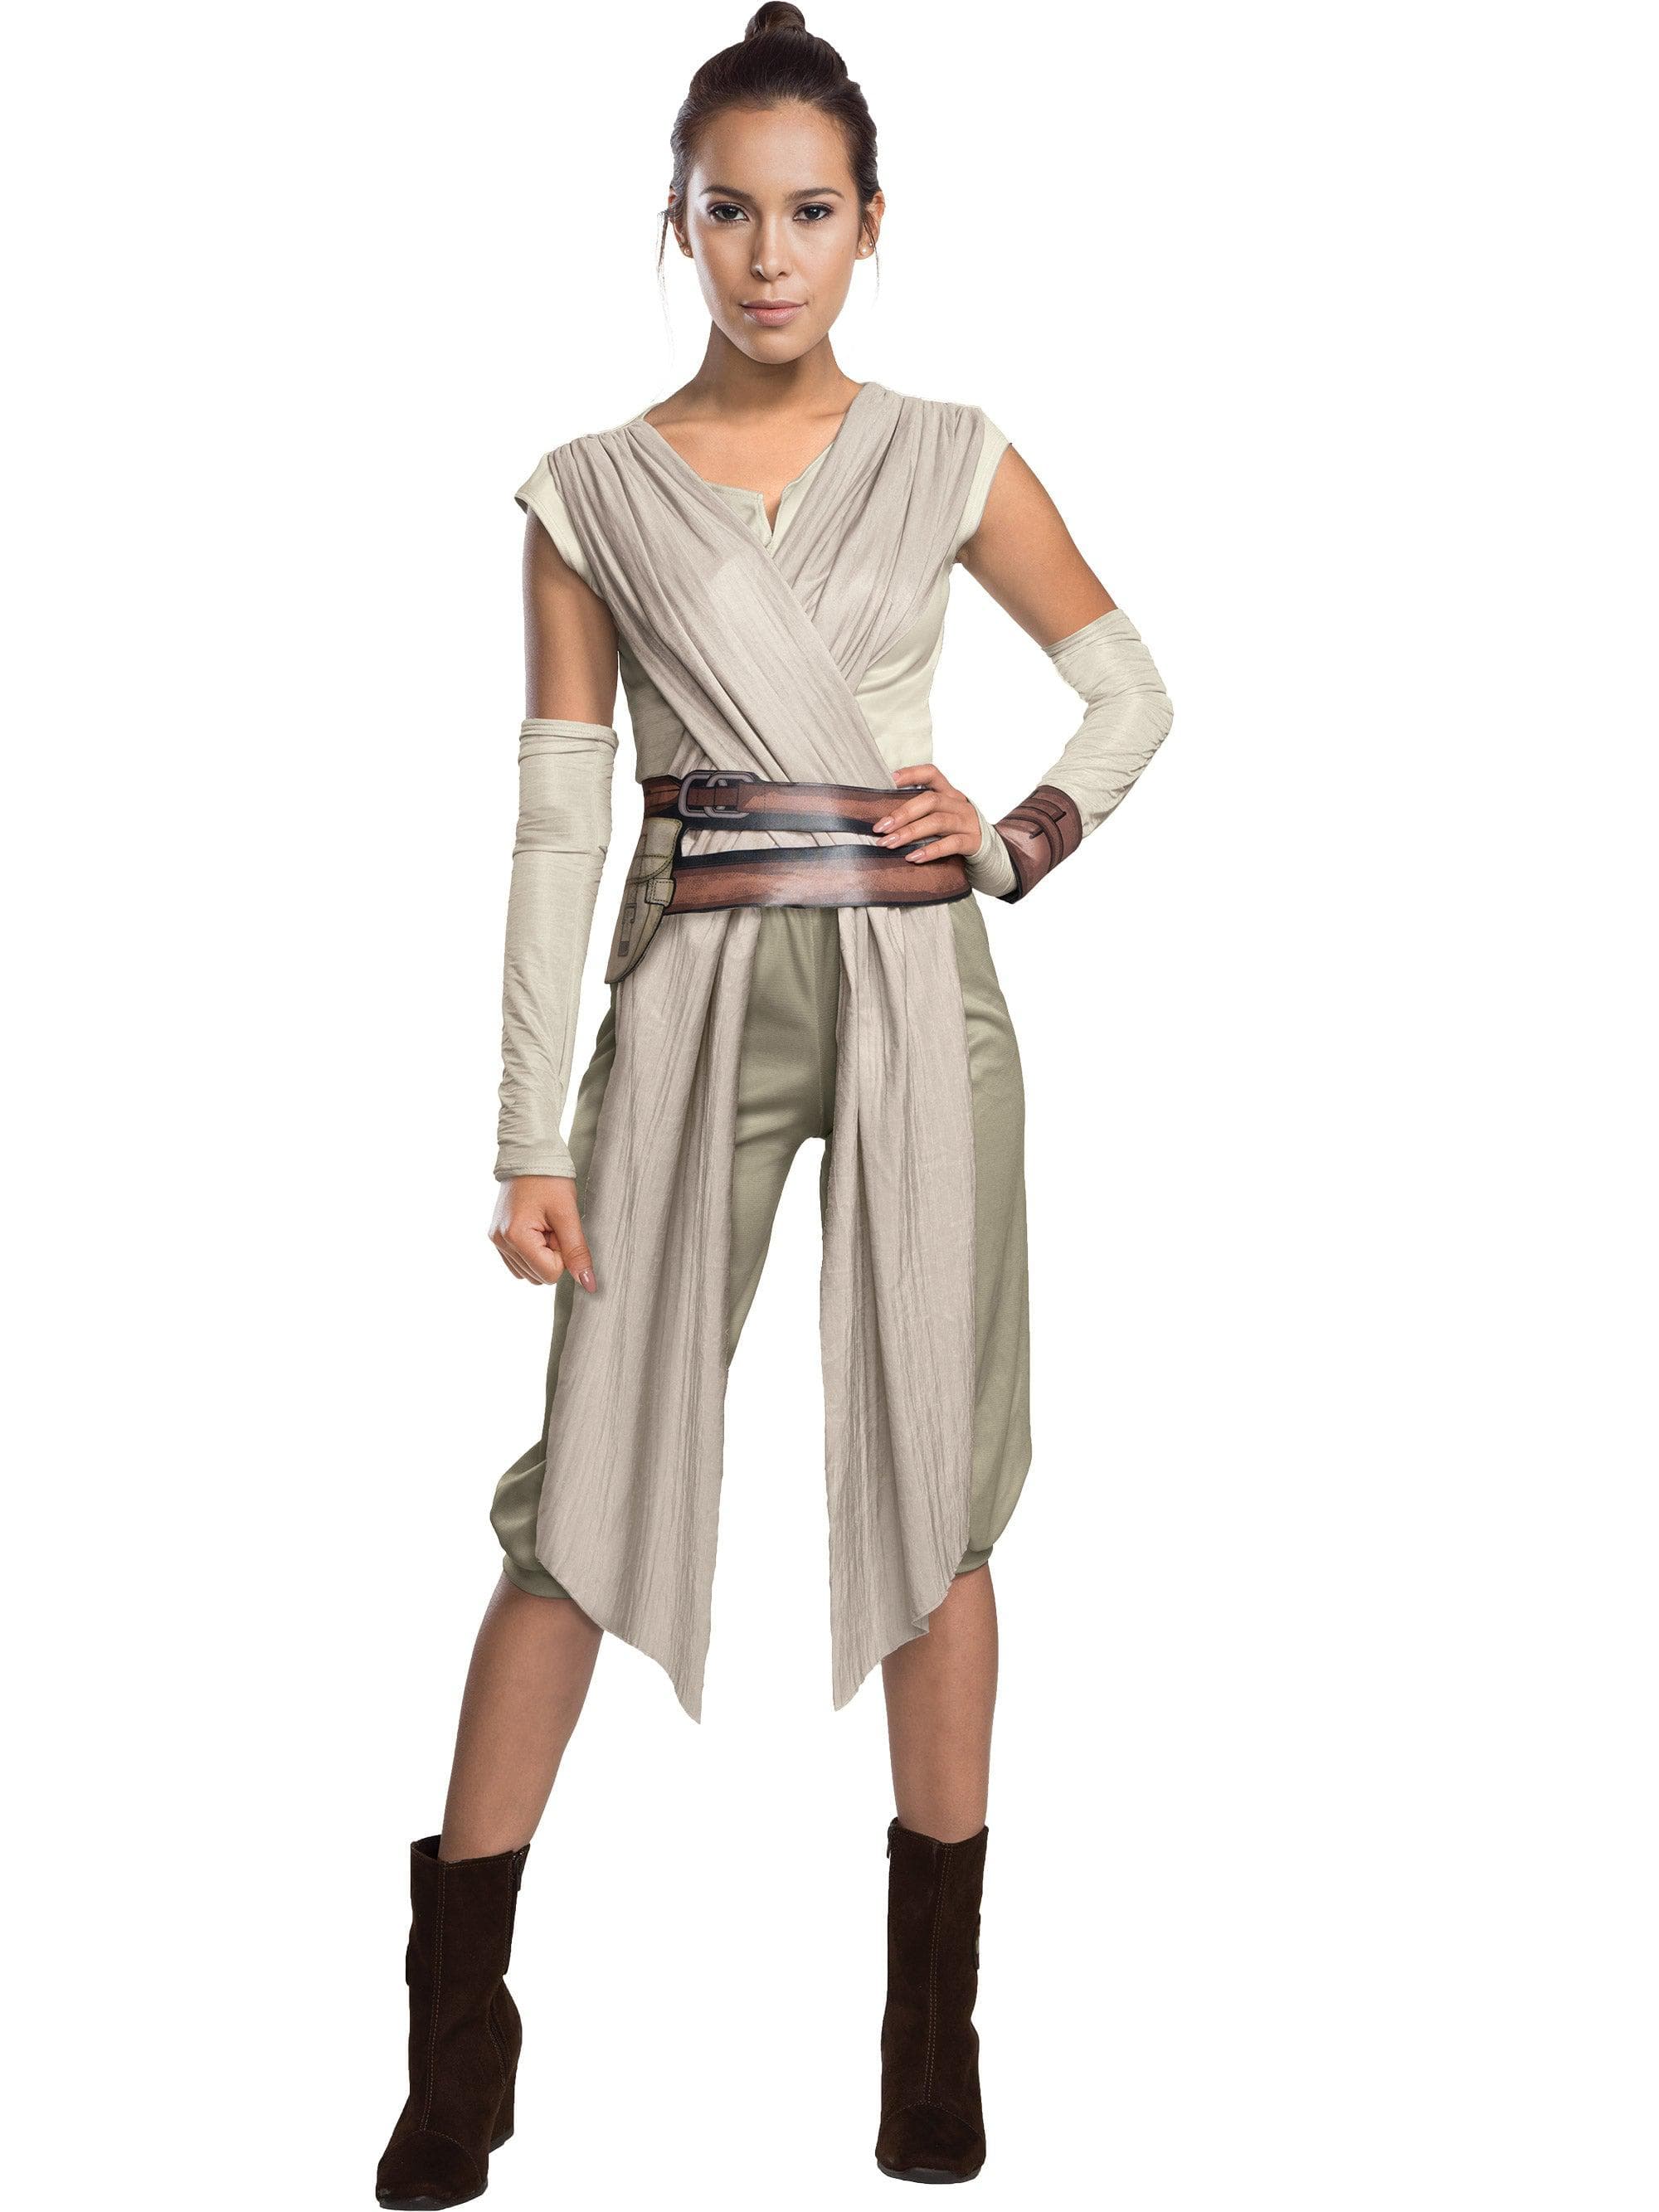 Adult The Force Awakens Rey Deluxe Costume - costumes.com